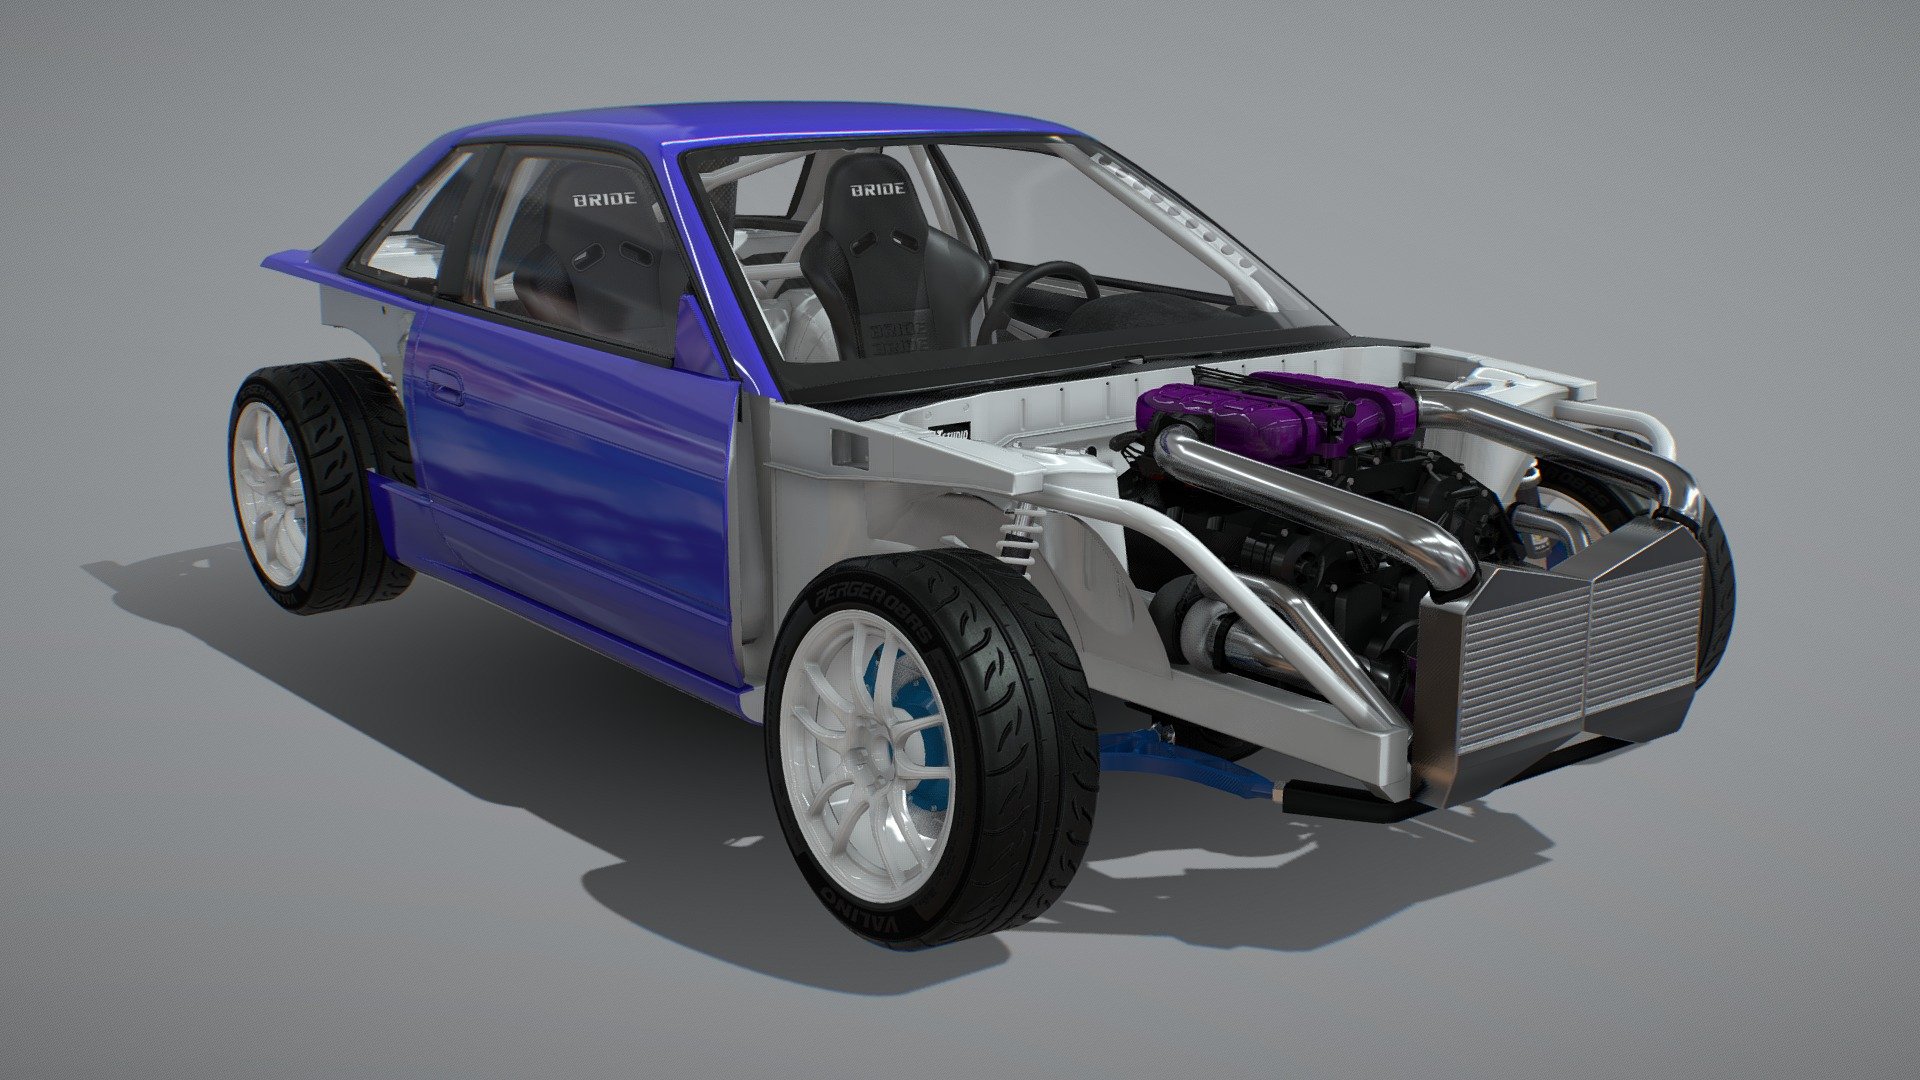 Ps13 chassis turned into competition drift car.

This car is made for assetto corsa and is very much work in progress.

Later will be for sale in gumroad as a complete assetto mod 3d model